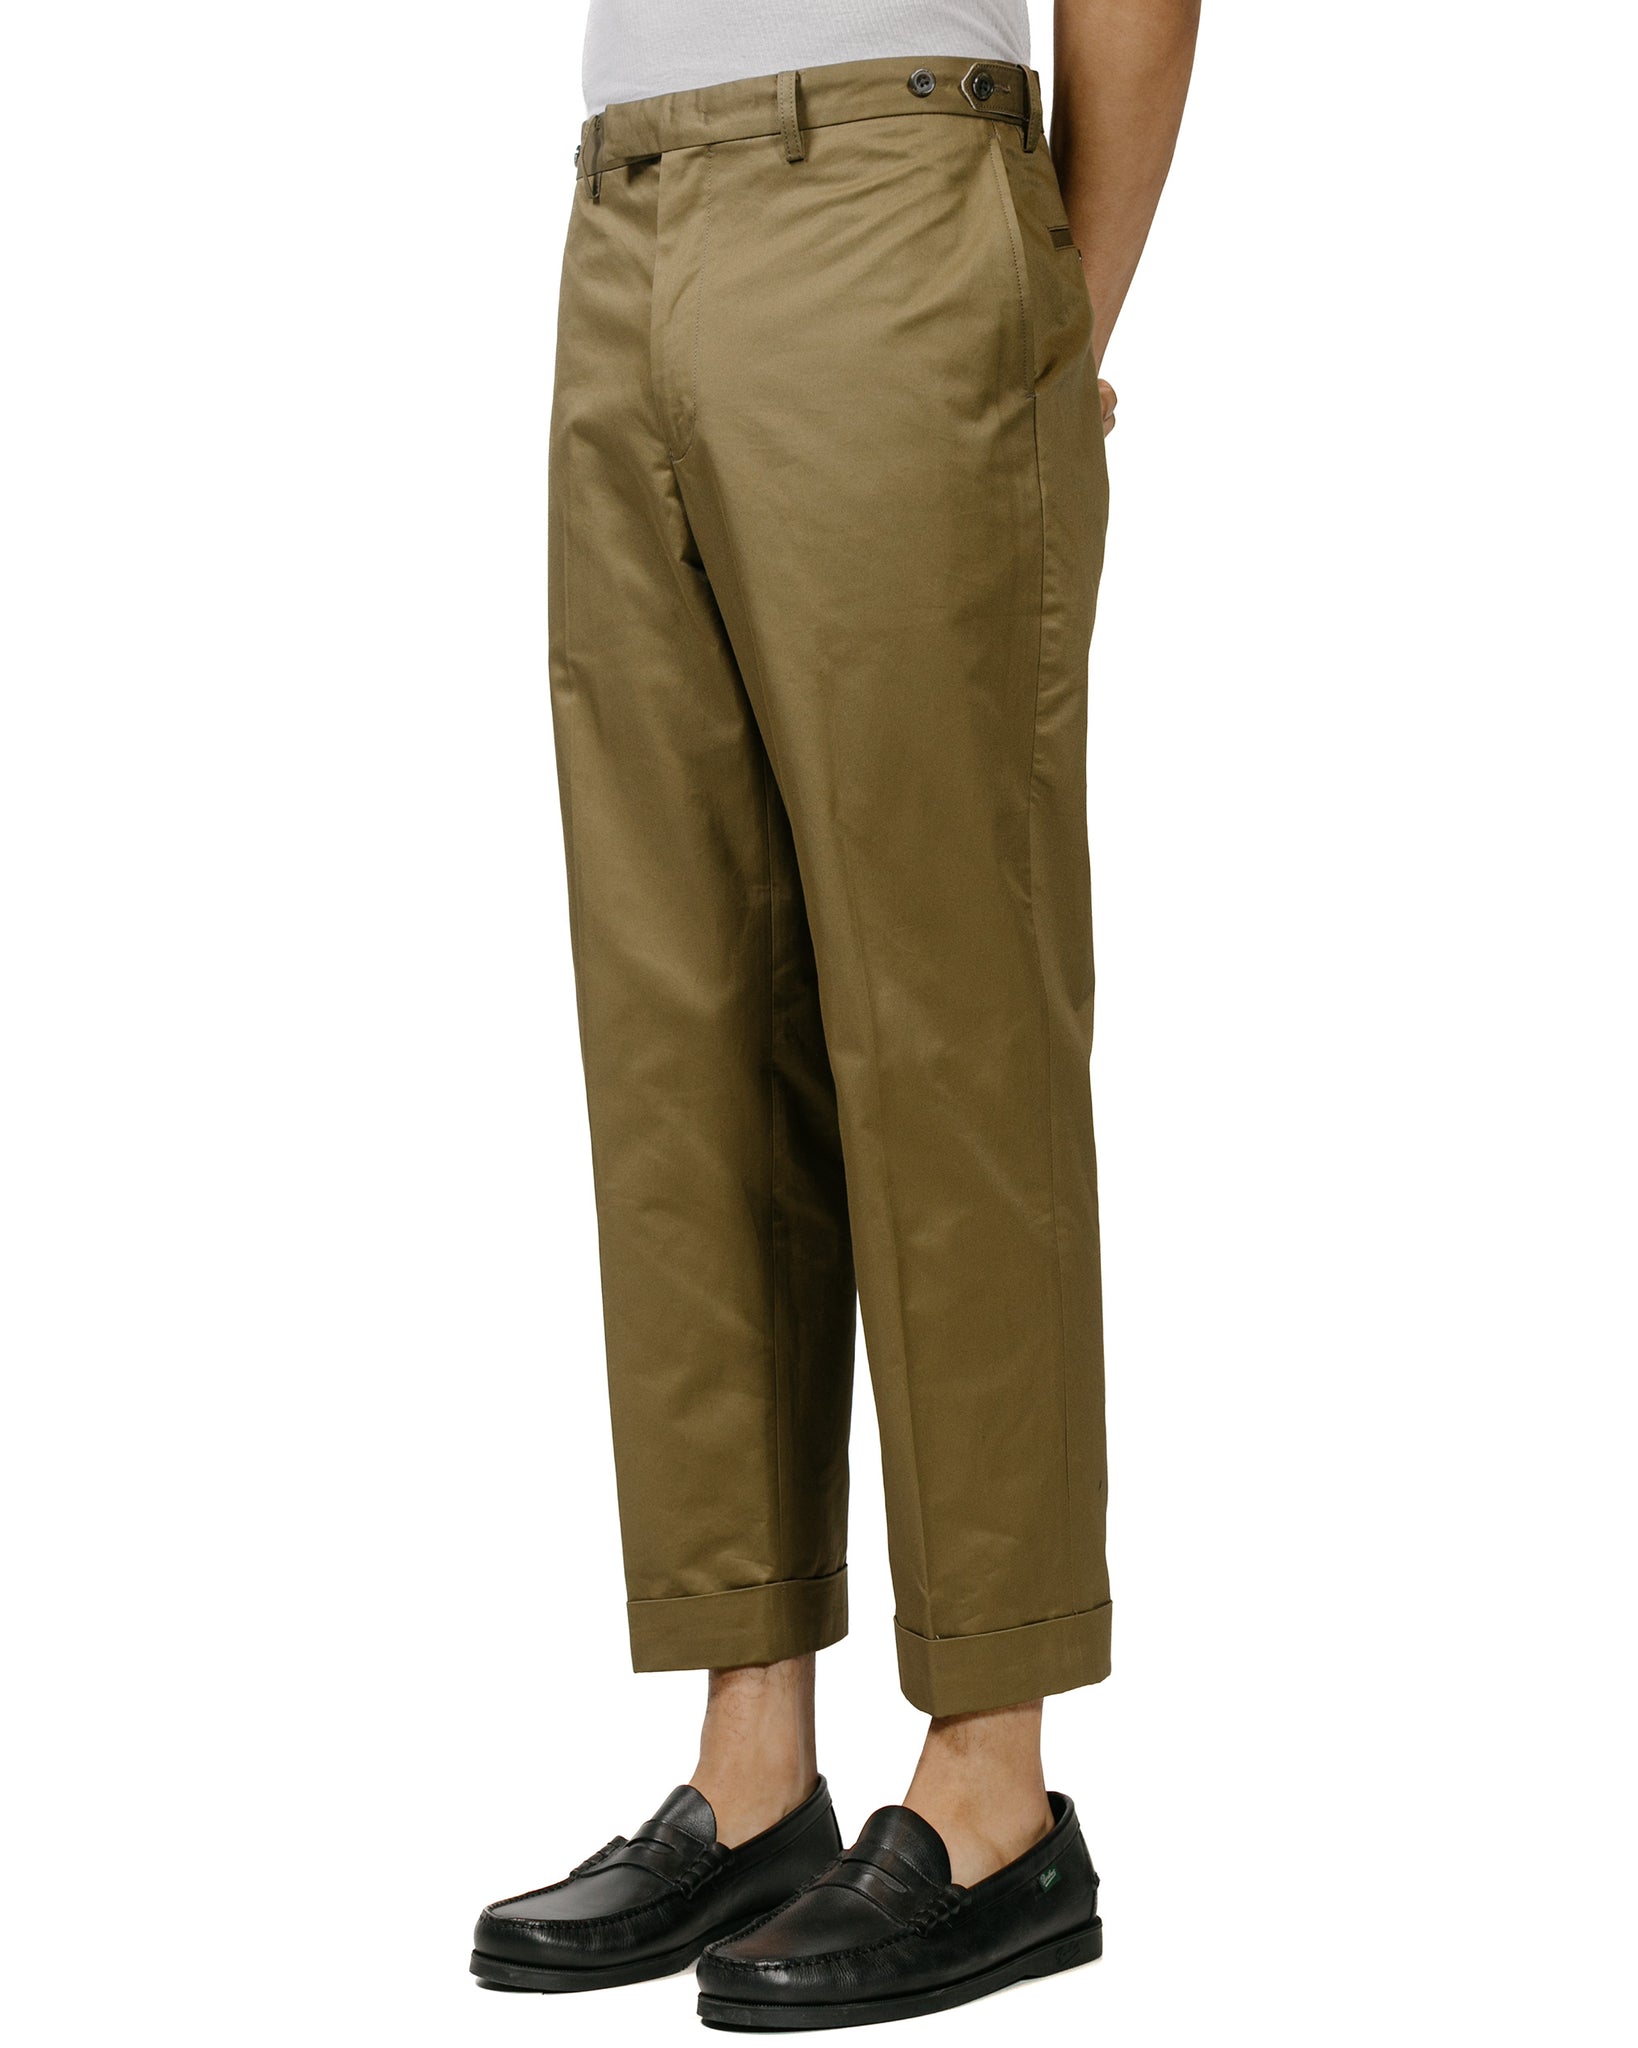 Beams Plus IVY Trousers Ankle-Cut 803 Twill Olive model front